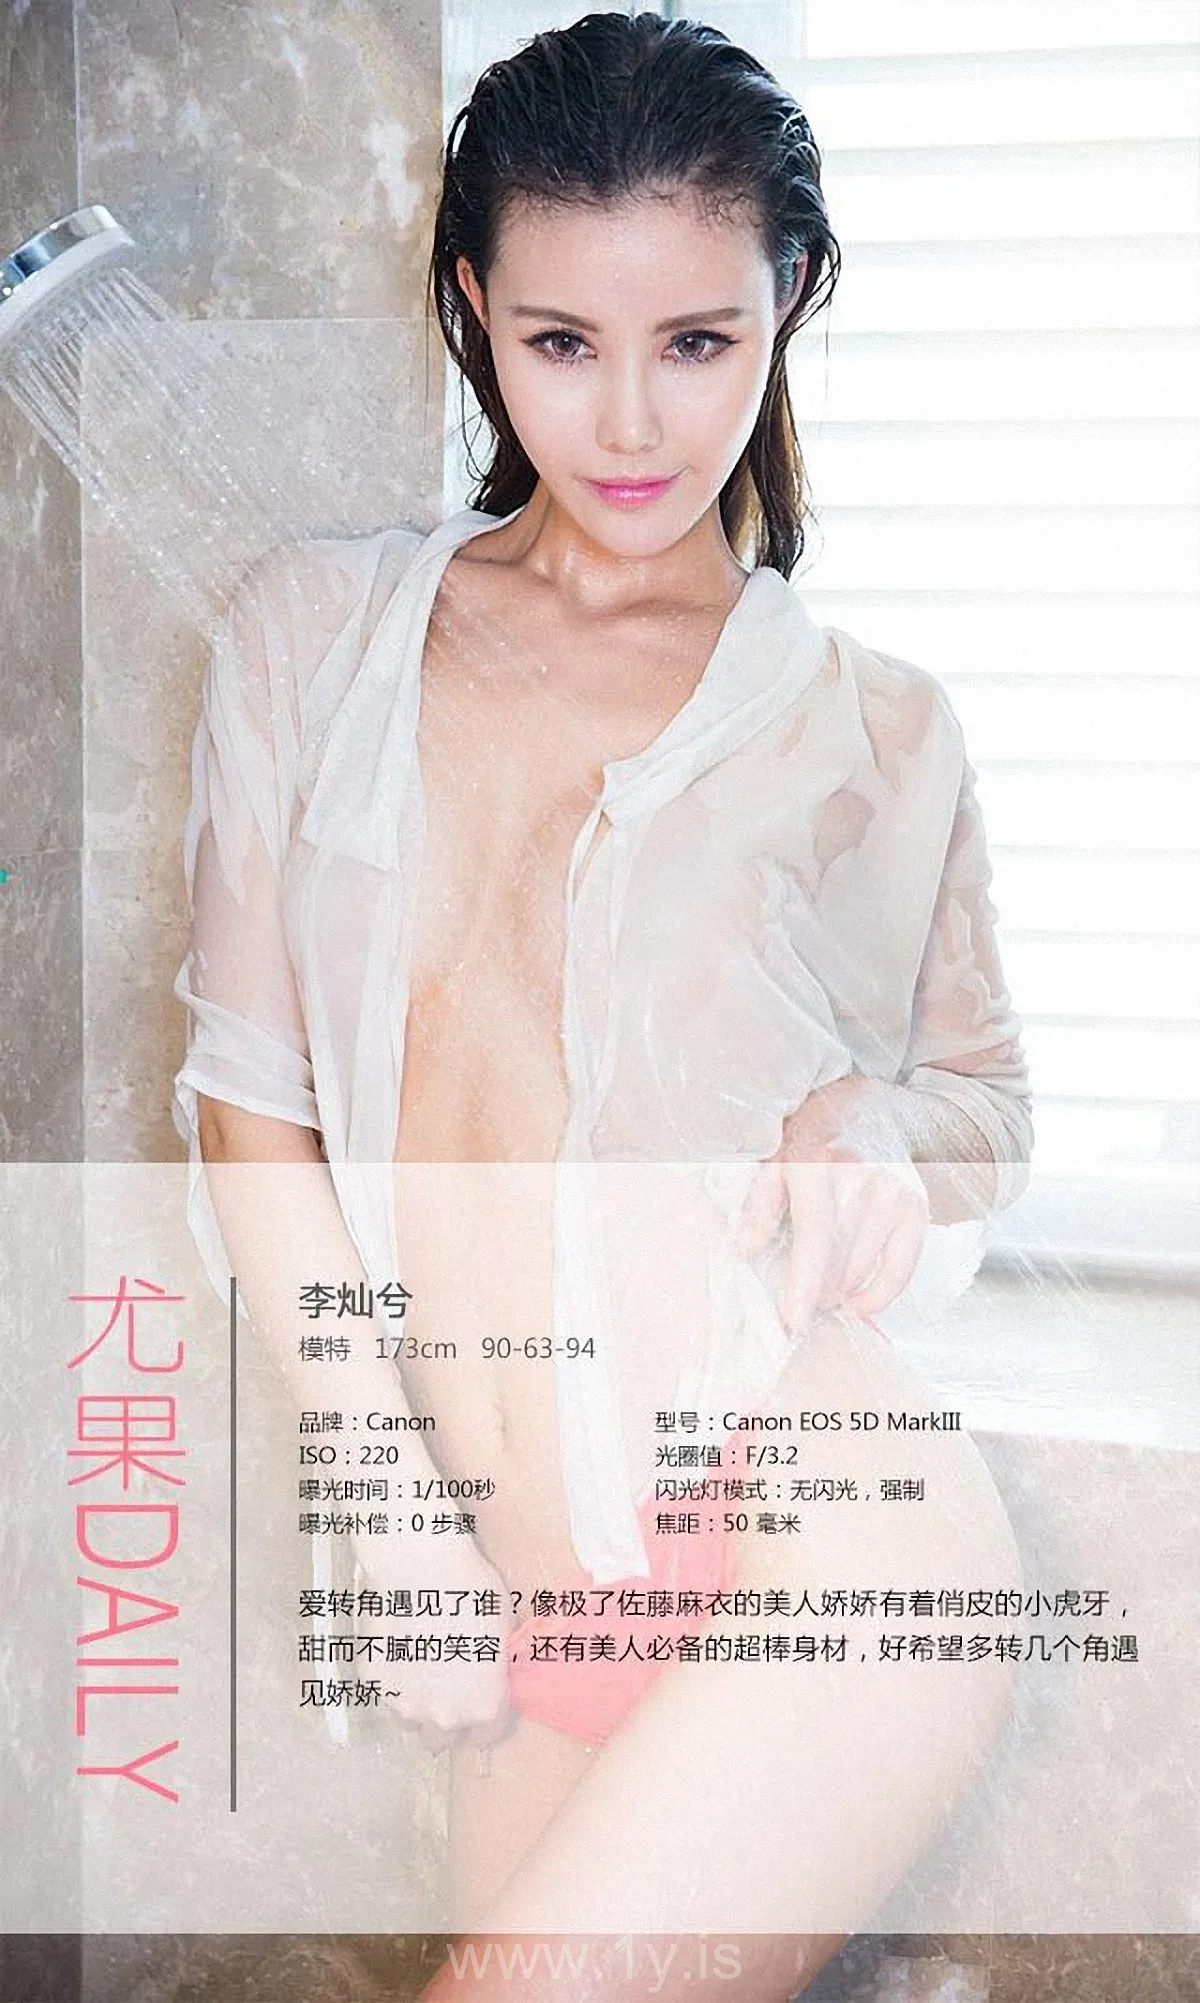 UGIRLS NO.246 Good-looking & Fashionable Chinese Girl 李灿兮